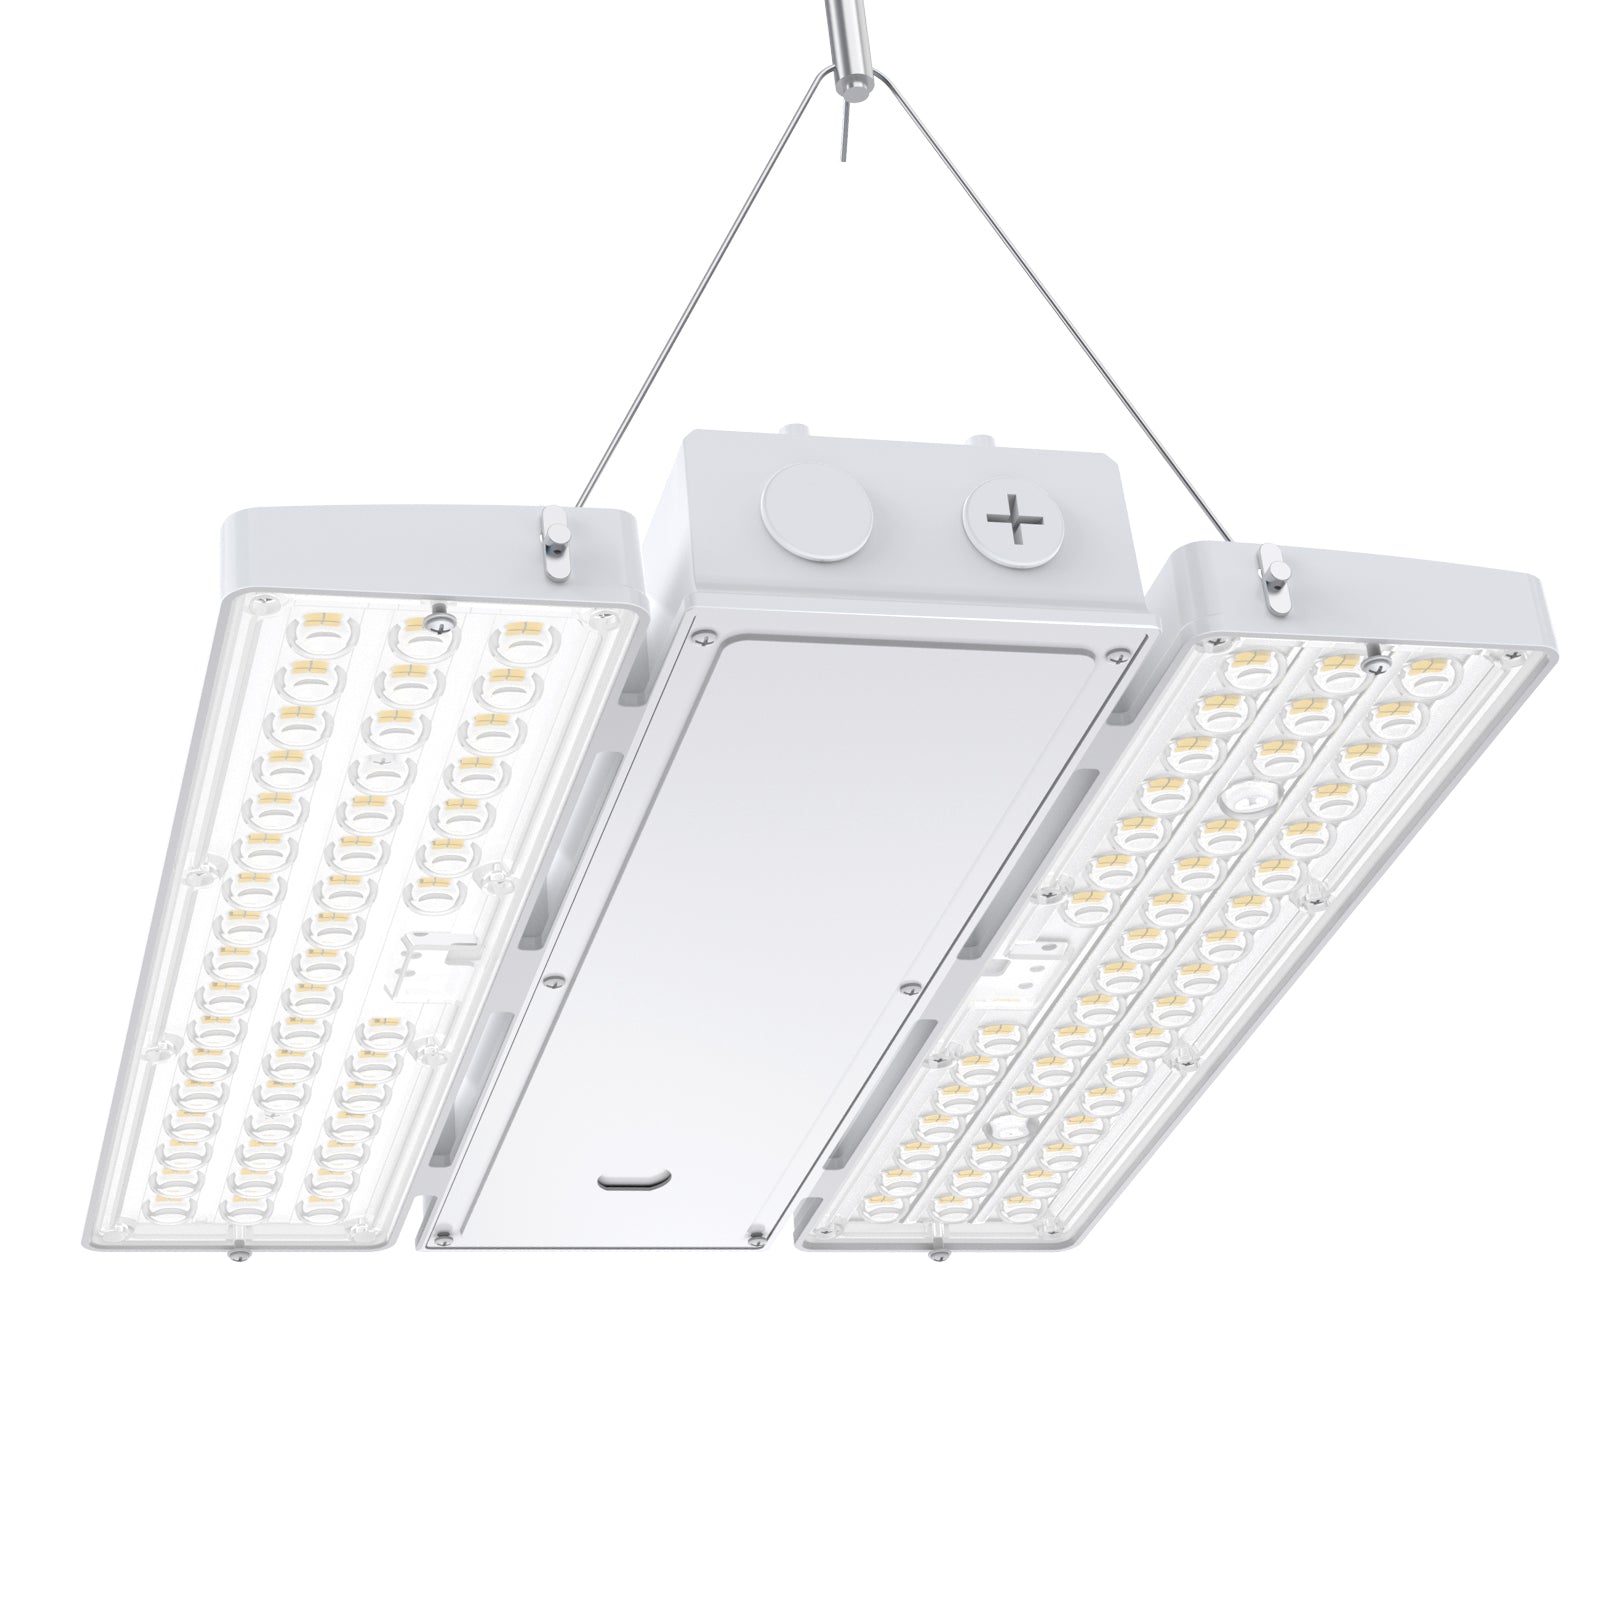 Contractors' Pick - Linear High Bay LED Lights - LHBC Series, Selectable Wattage &CCT Adjustable, 90W-310W, 46500lumens